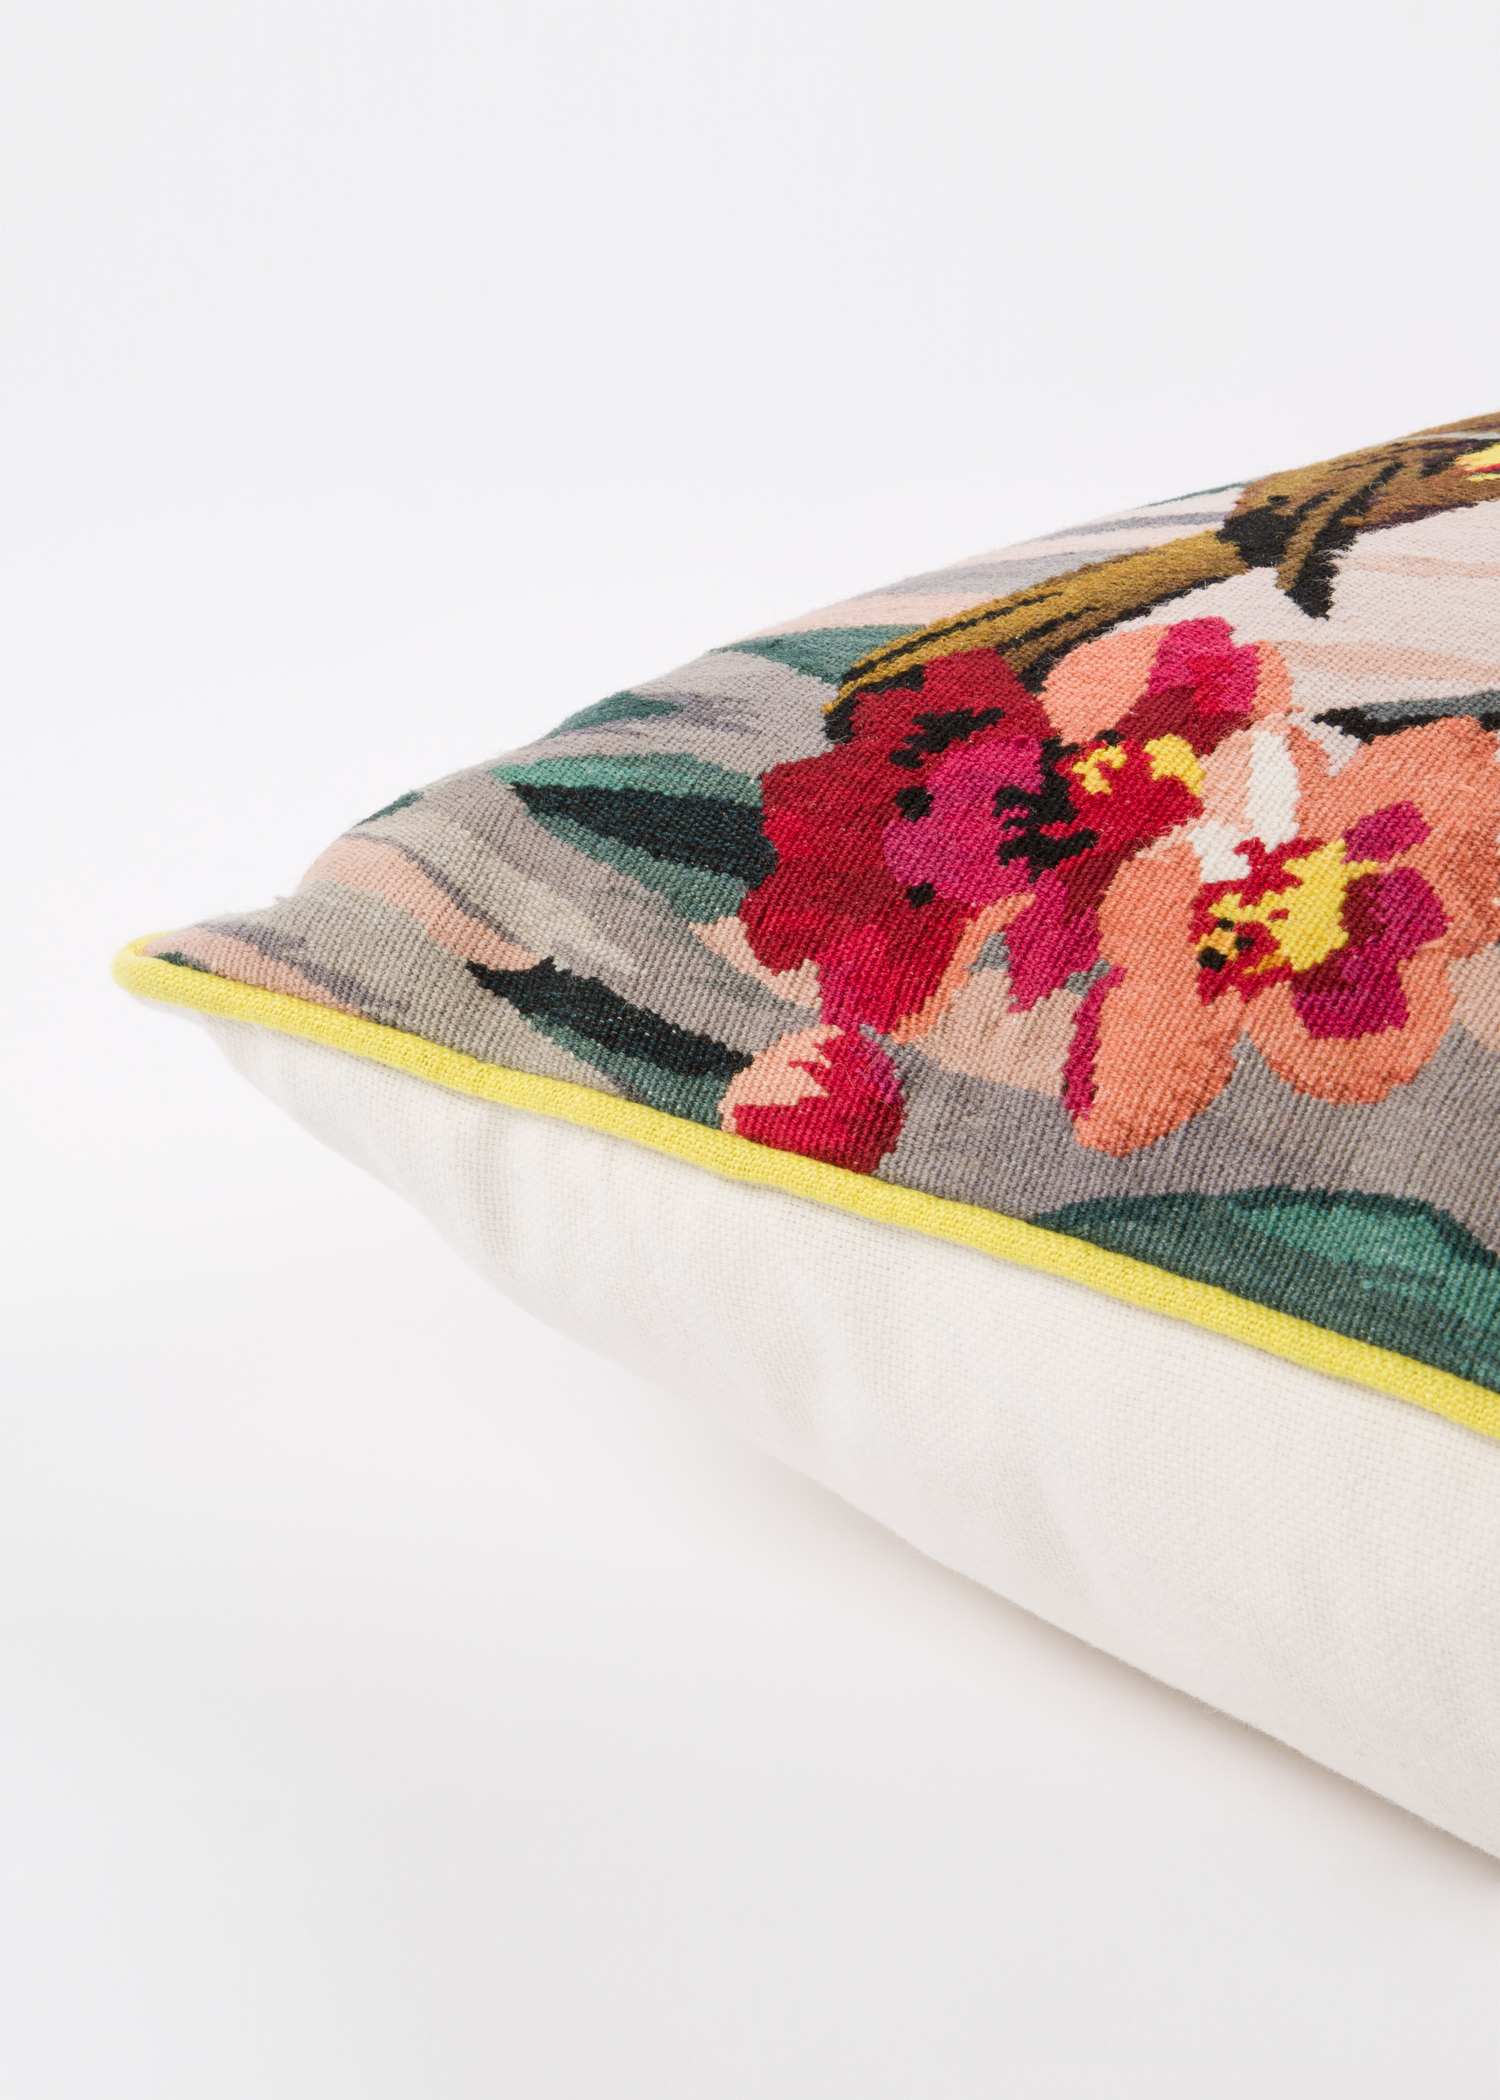 Detail view - Paul Smith For The Rug Company - 'Birdie Blossom' Wool Tapestry Cushion